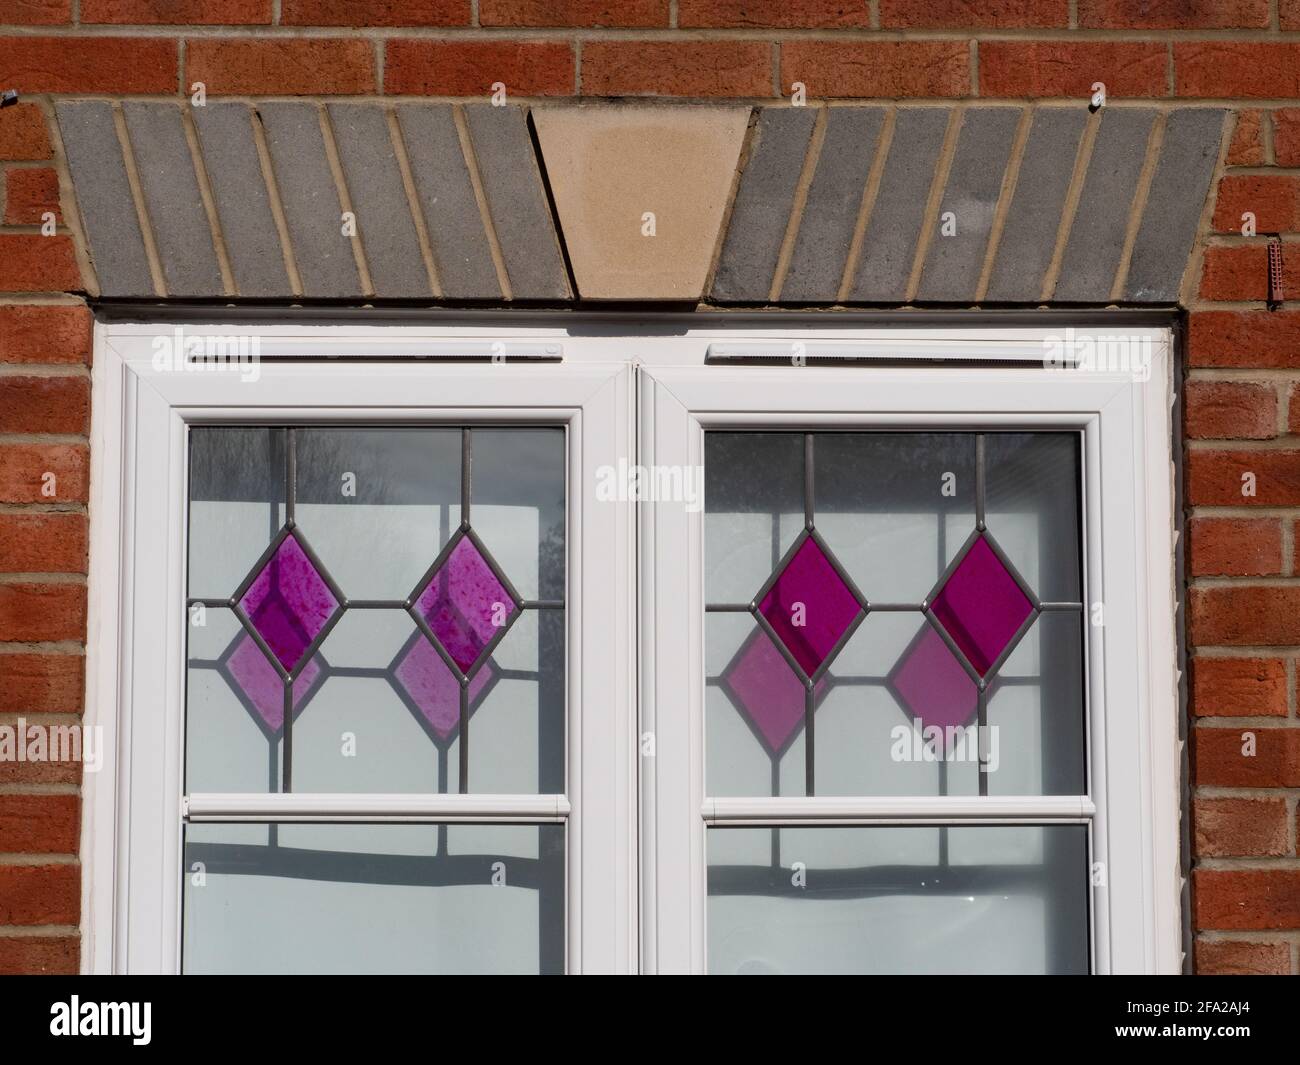 Coloured, patterned glass in window panes throwing shadows on the blinds behind. In Westbury, Wiltshire, England, UK. Stock Photo